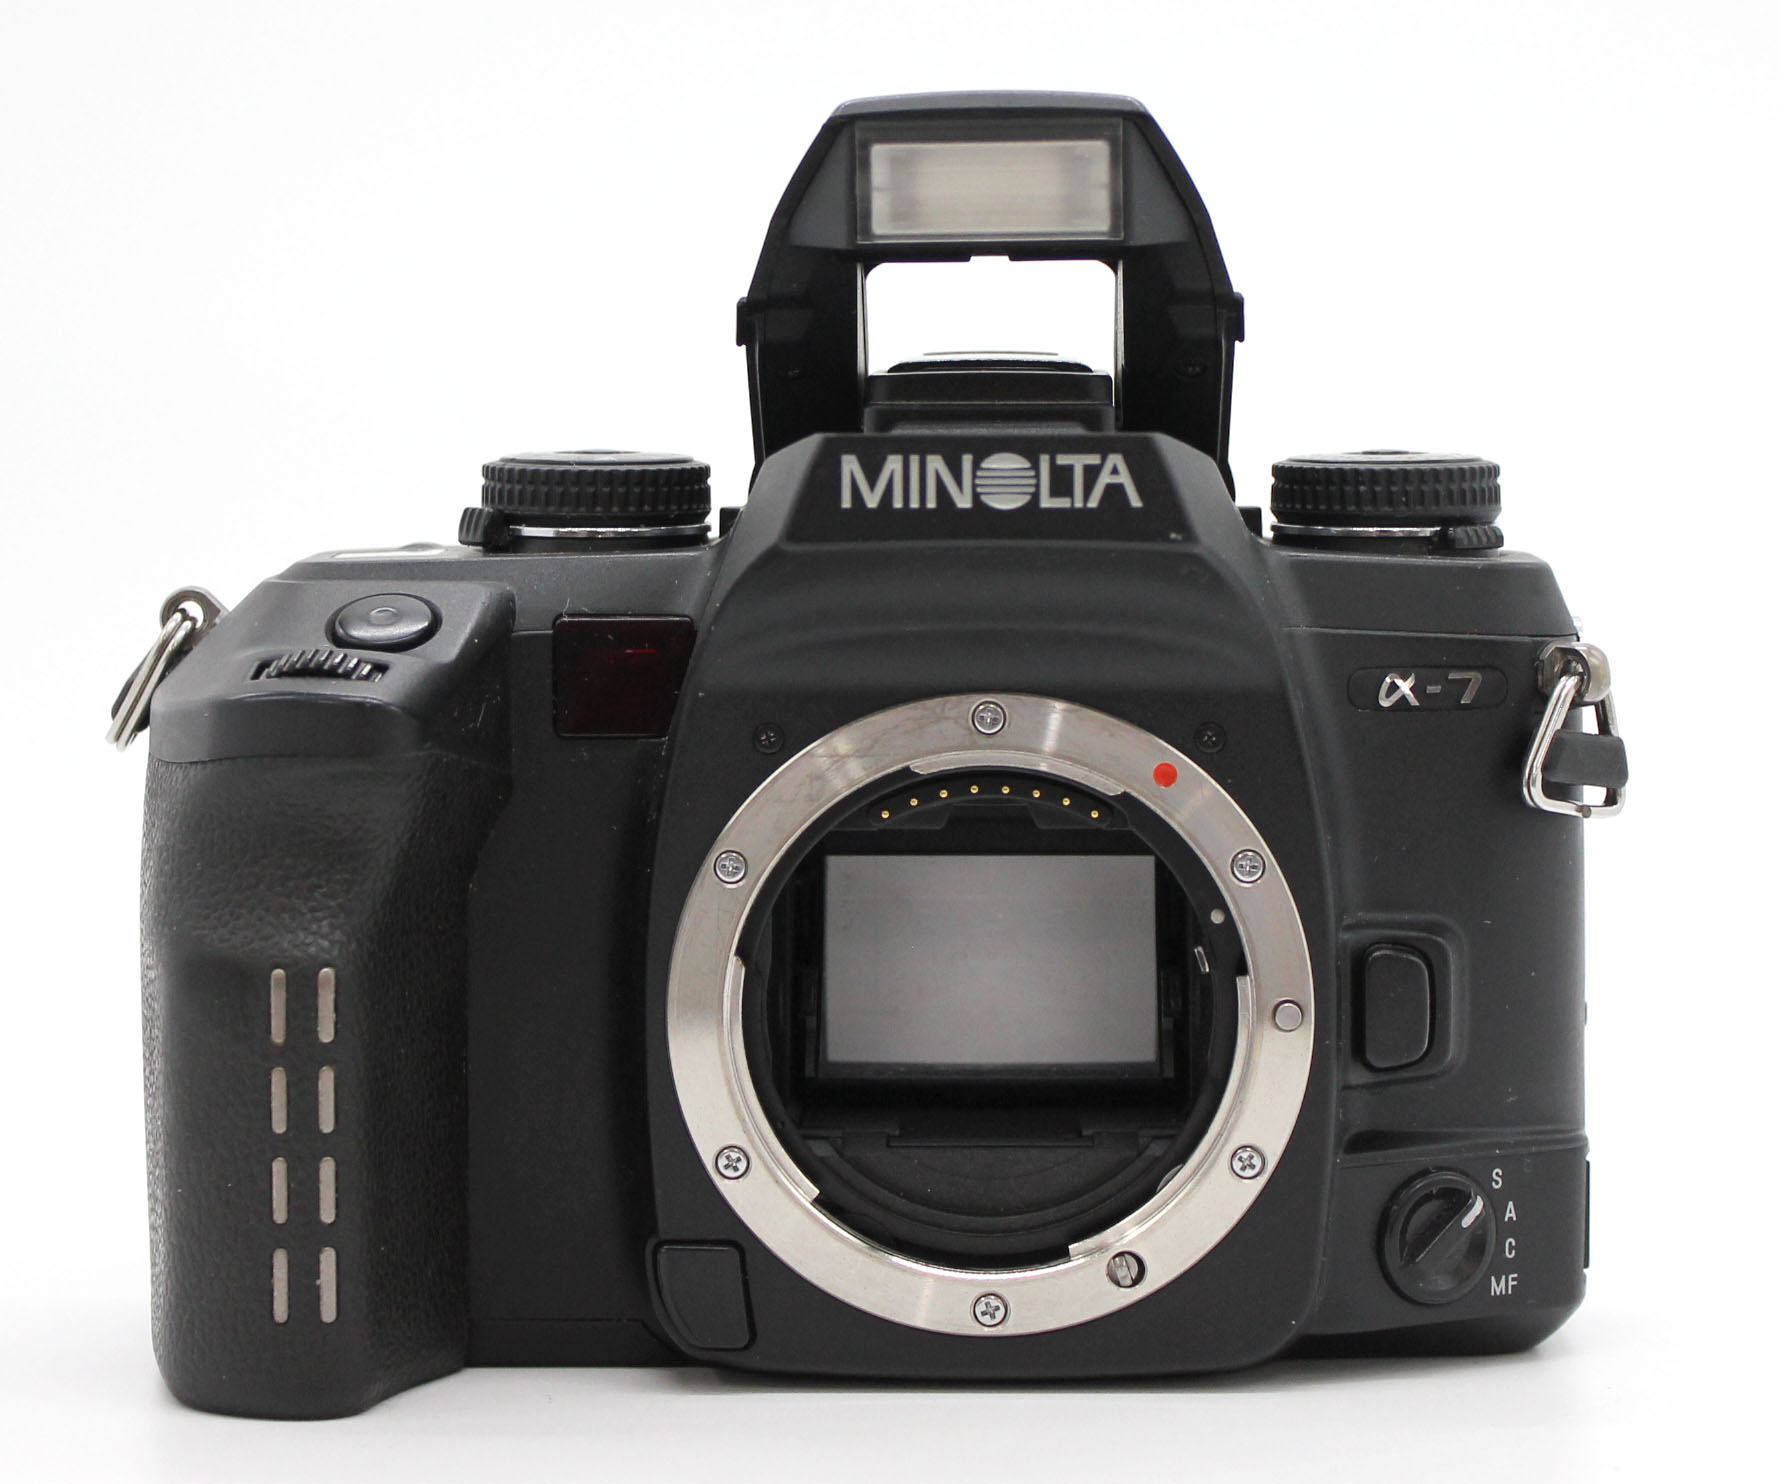  Minolta Maxxum 7 Dynax 7 a7 with AF Zoom 35-105mm F/3.5-4.5 from Japan Photo 3